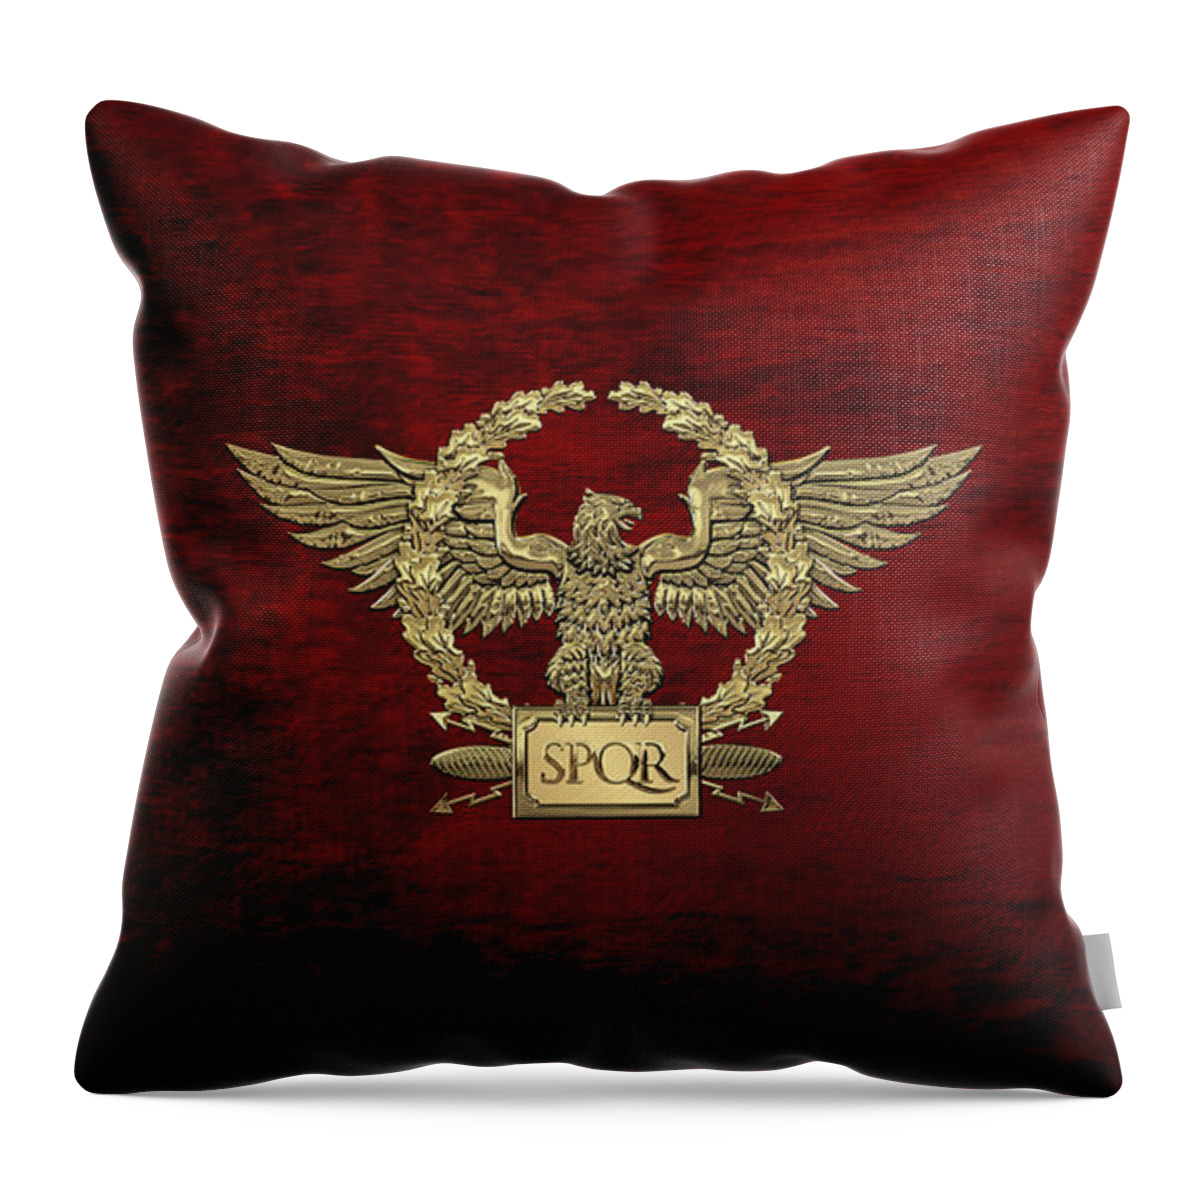 ‘treasures Of Rome’ Collection By Serge Averbukh Throw Pillow featuring the digital art Gold Roman Imperial Eagle - S P Q R Special Edition over Red Velvet by Serge Averbukh